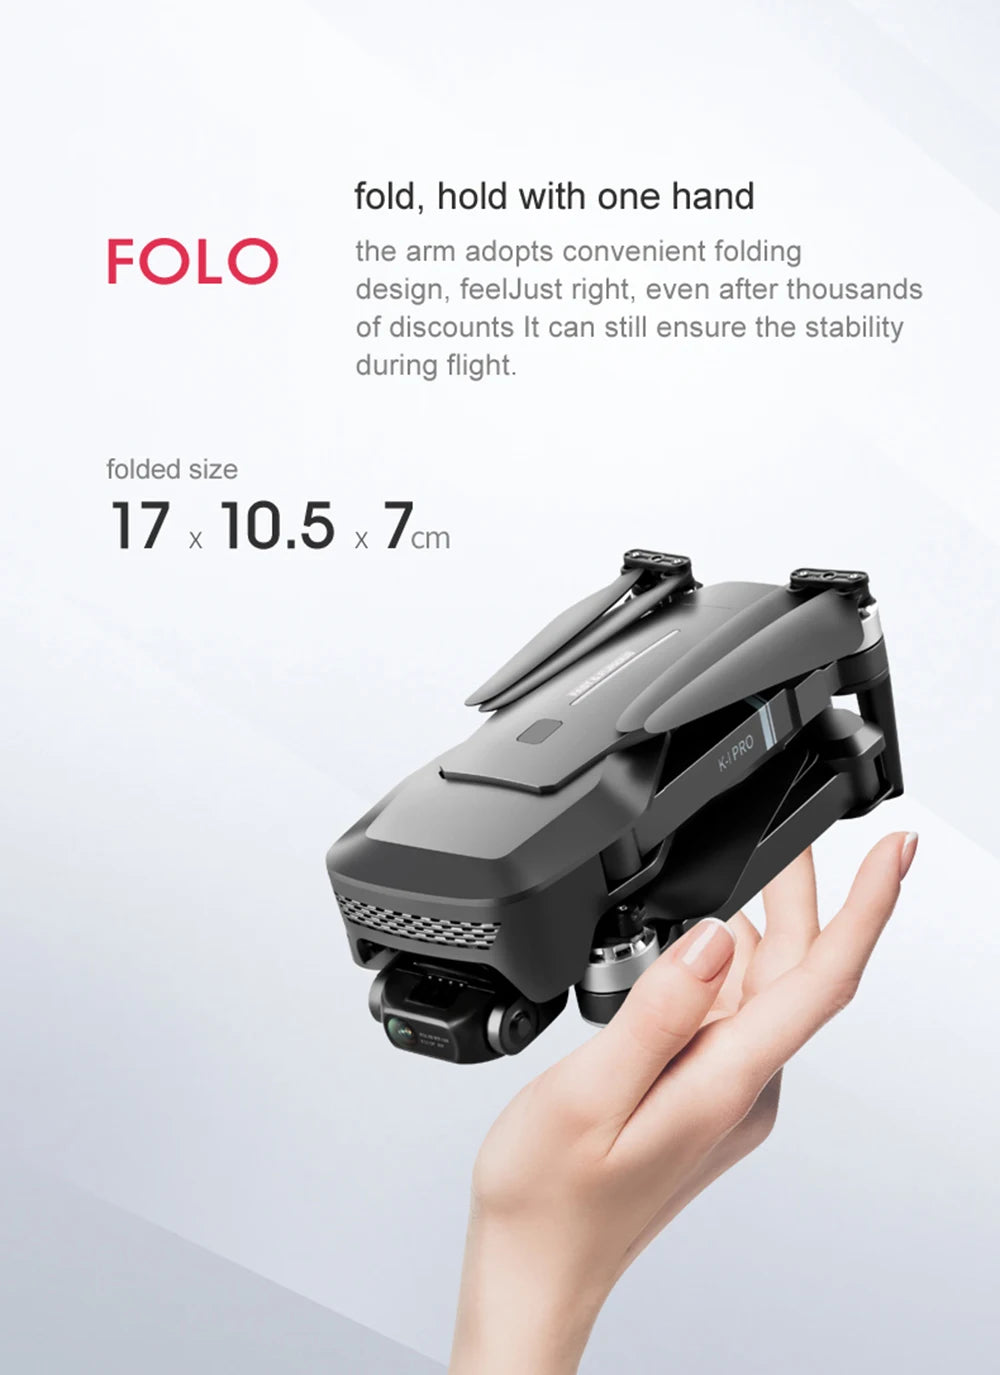 VISUO ZEN K1 PRO Drone, fold, hold with one hand FOLO the arm adopts convenient folding design, feelJust right